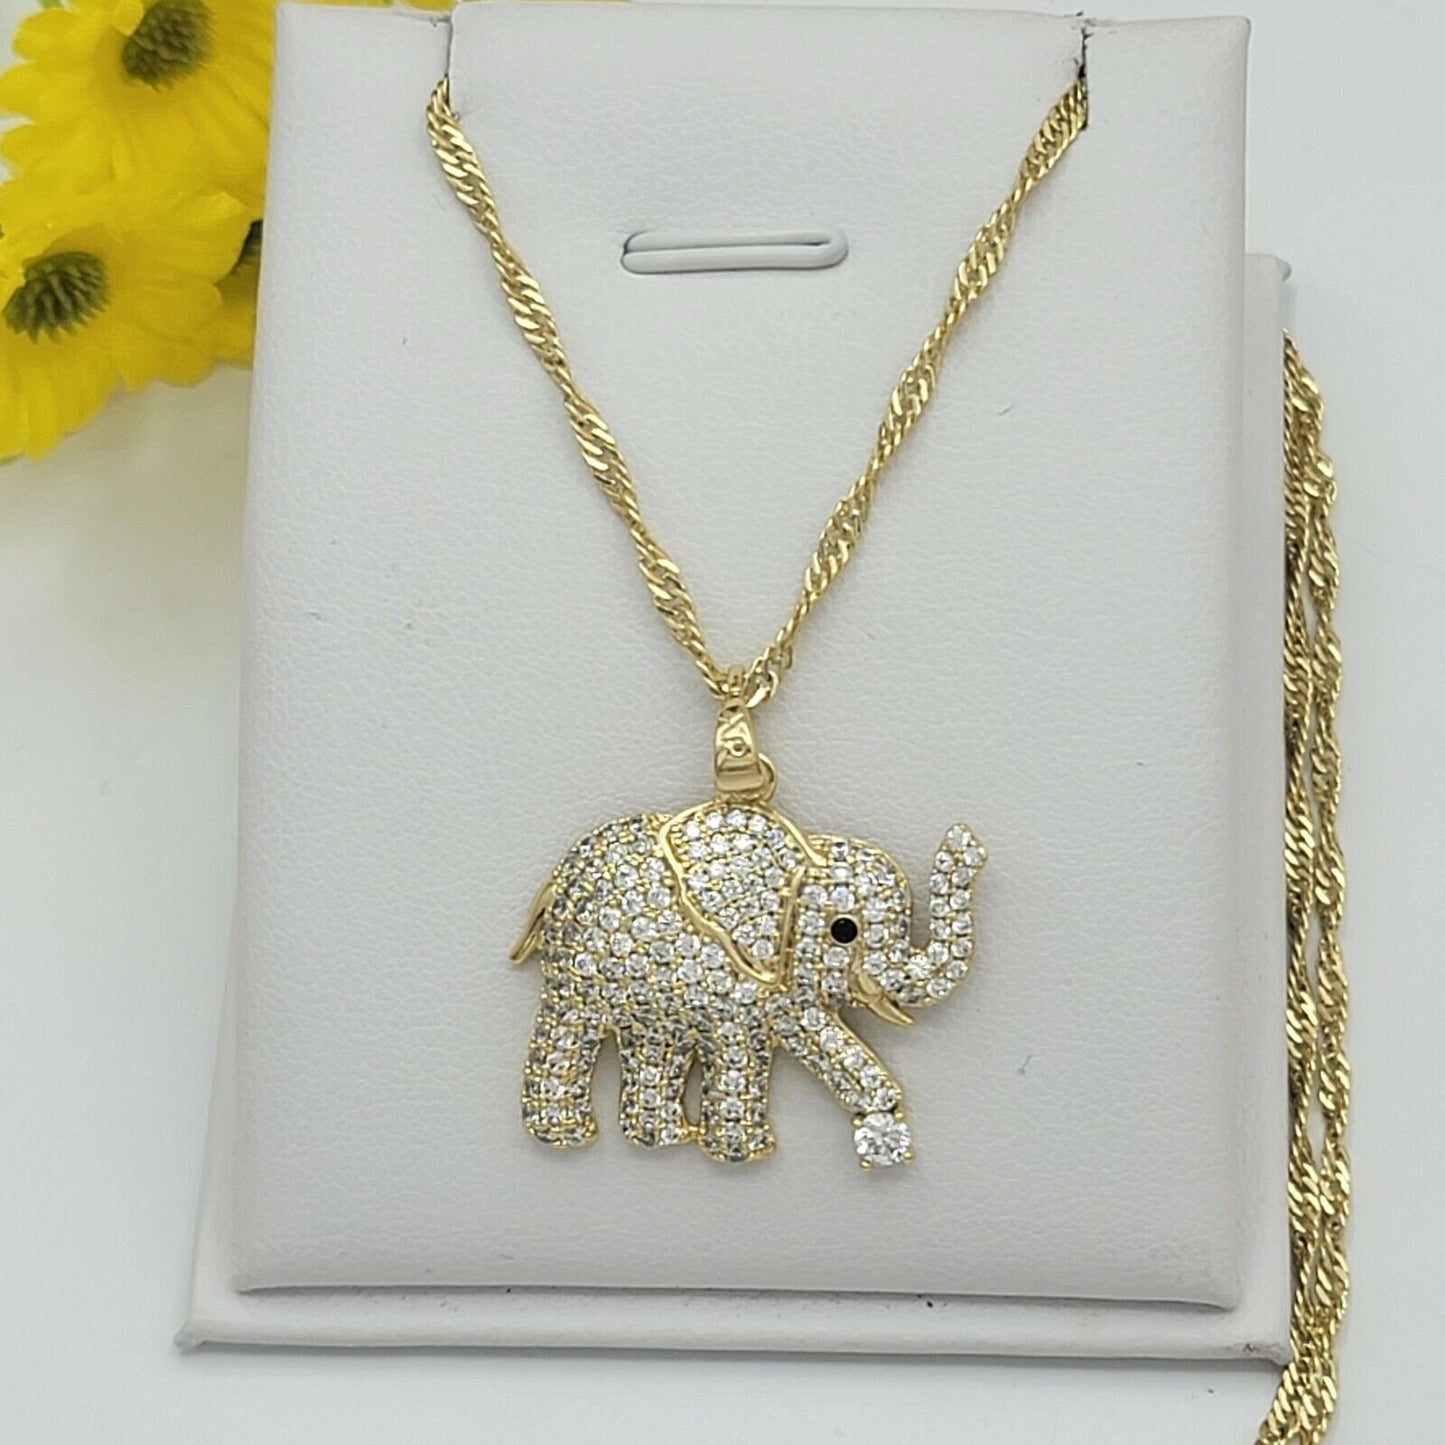 Necklaces - 14K Gold Plated. Elephant with CZ Pendant & Chain.